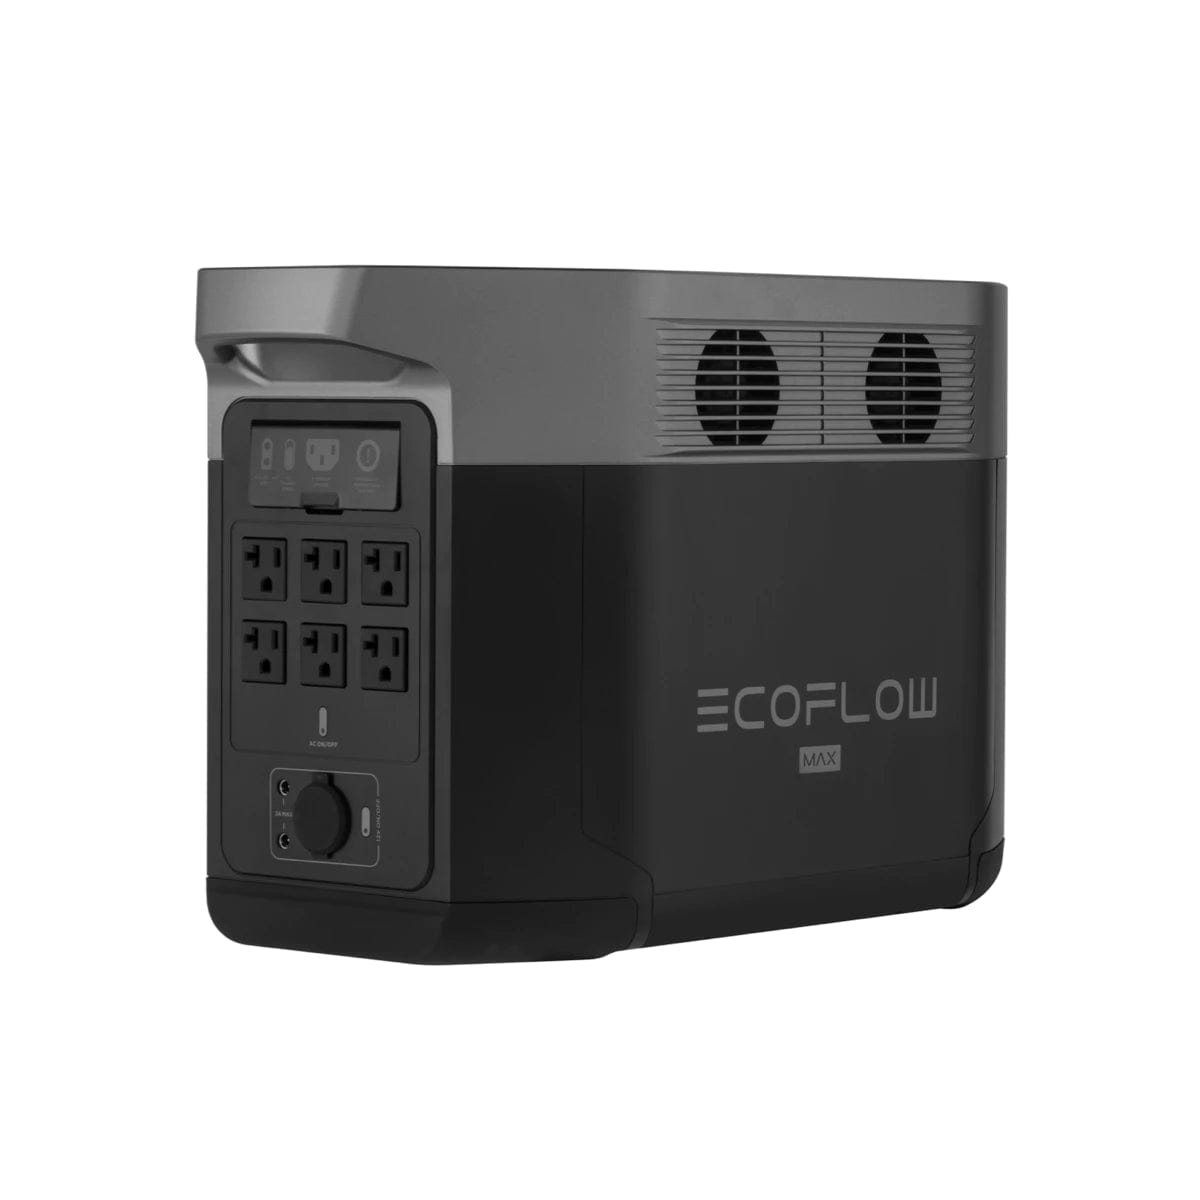 EcoFlow Delta 2 Max vs EcoFlow Delta Pro: What is the difference?